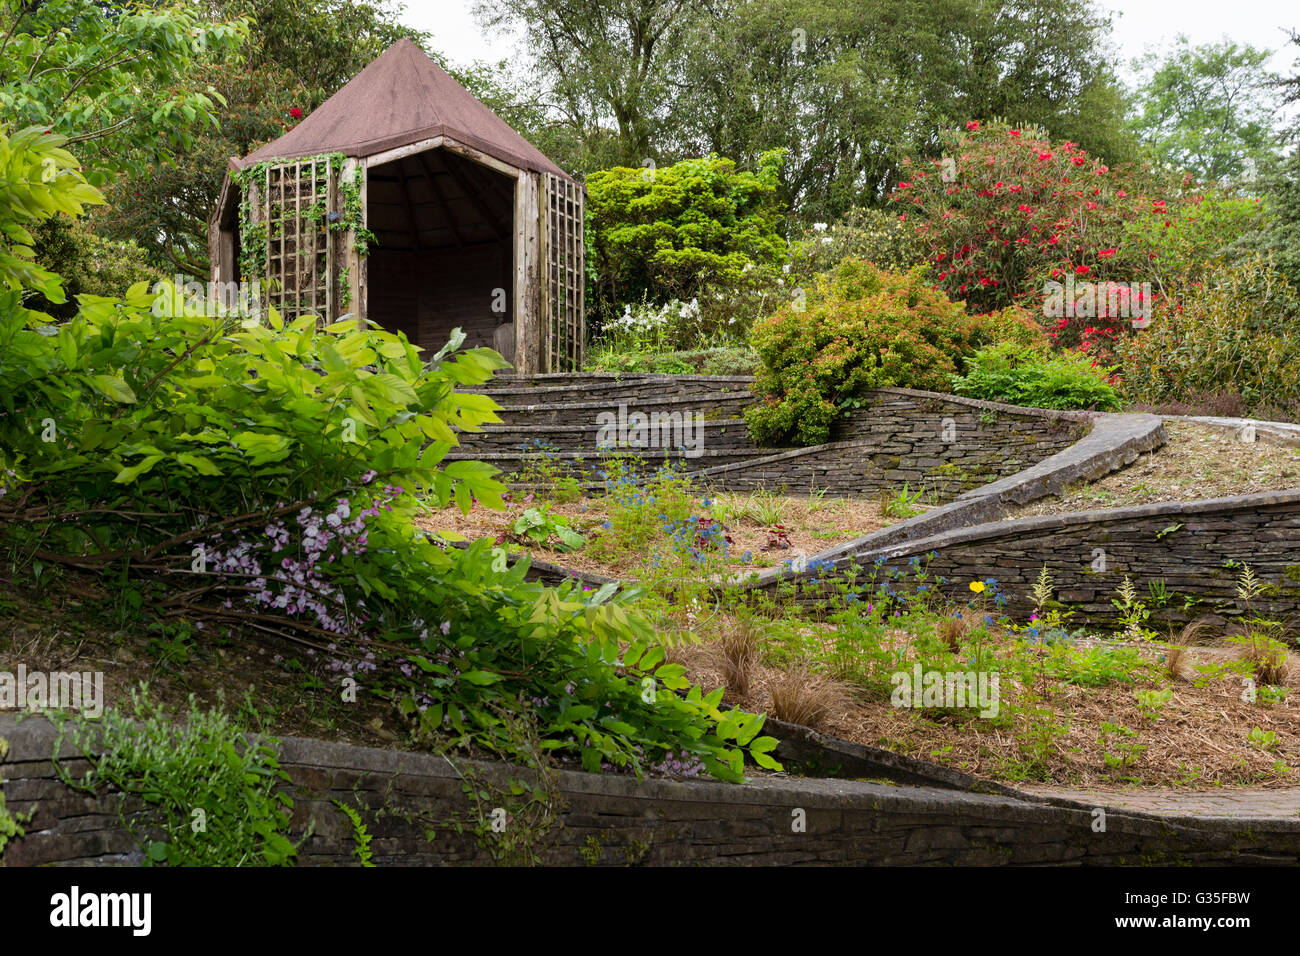 The Garden House, Devon, UK, the Ovals garden ornamentally terraces a slope using steps and drystone walling. Stock Photo